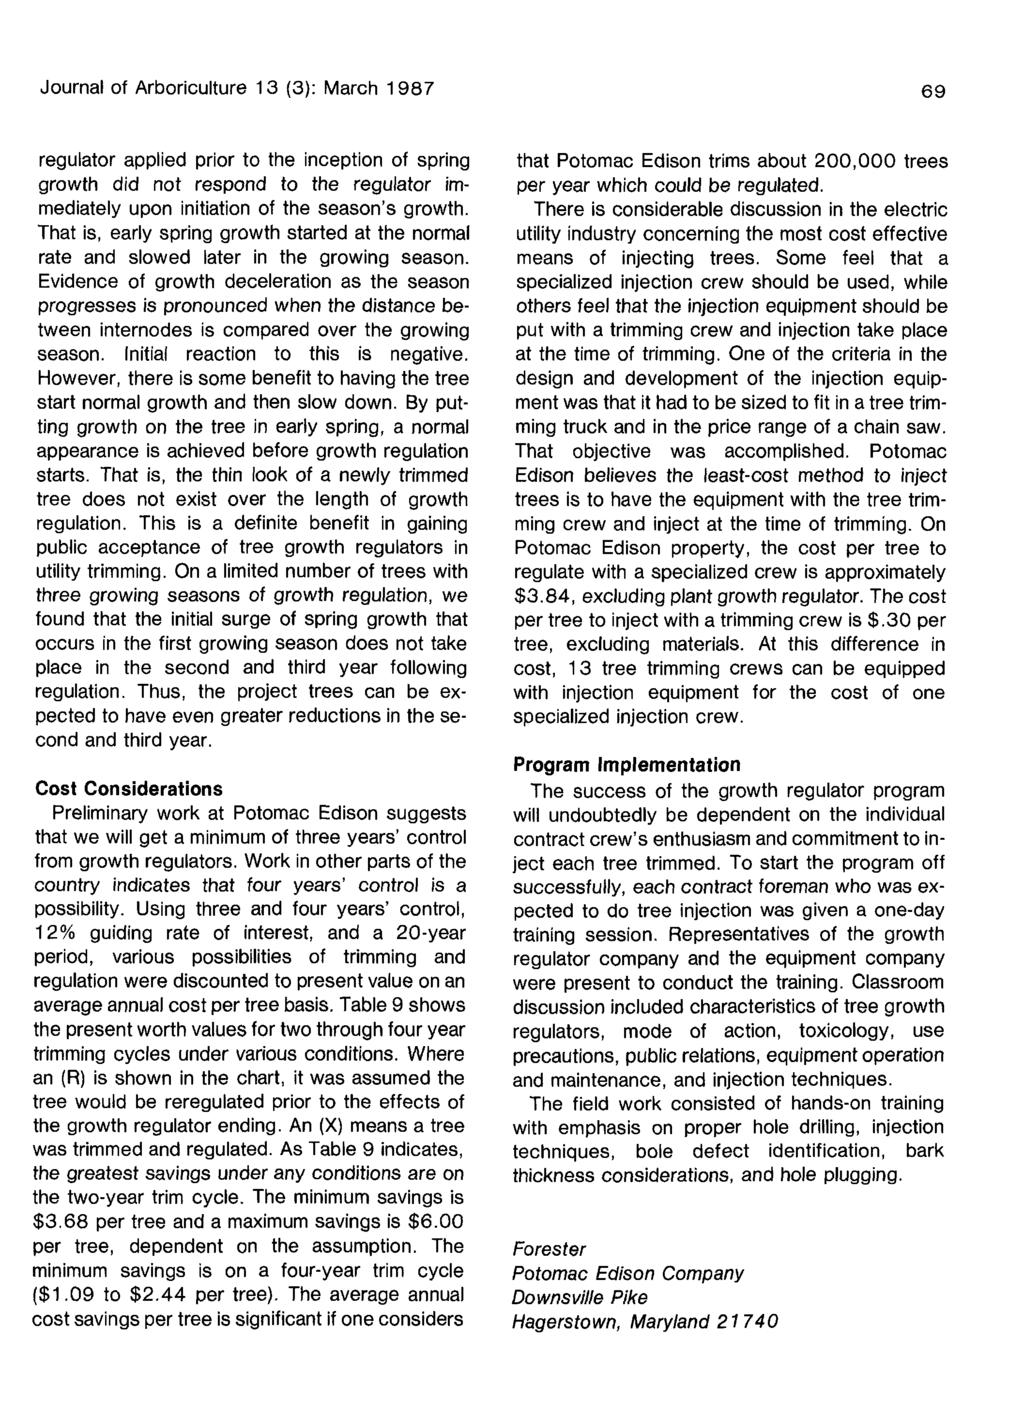 Journal of Arboriculture 13 (3): 197 69 regulator applied prior to the inception of spring growth did not respond to the regulator immediately upon initiation of the season's growth.